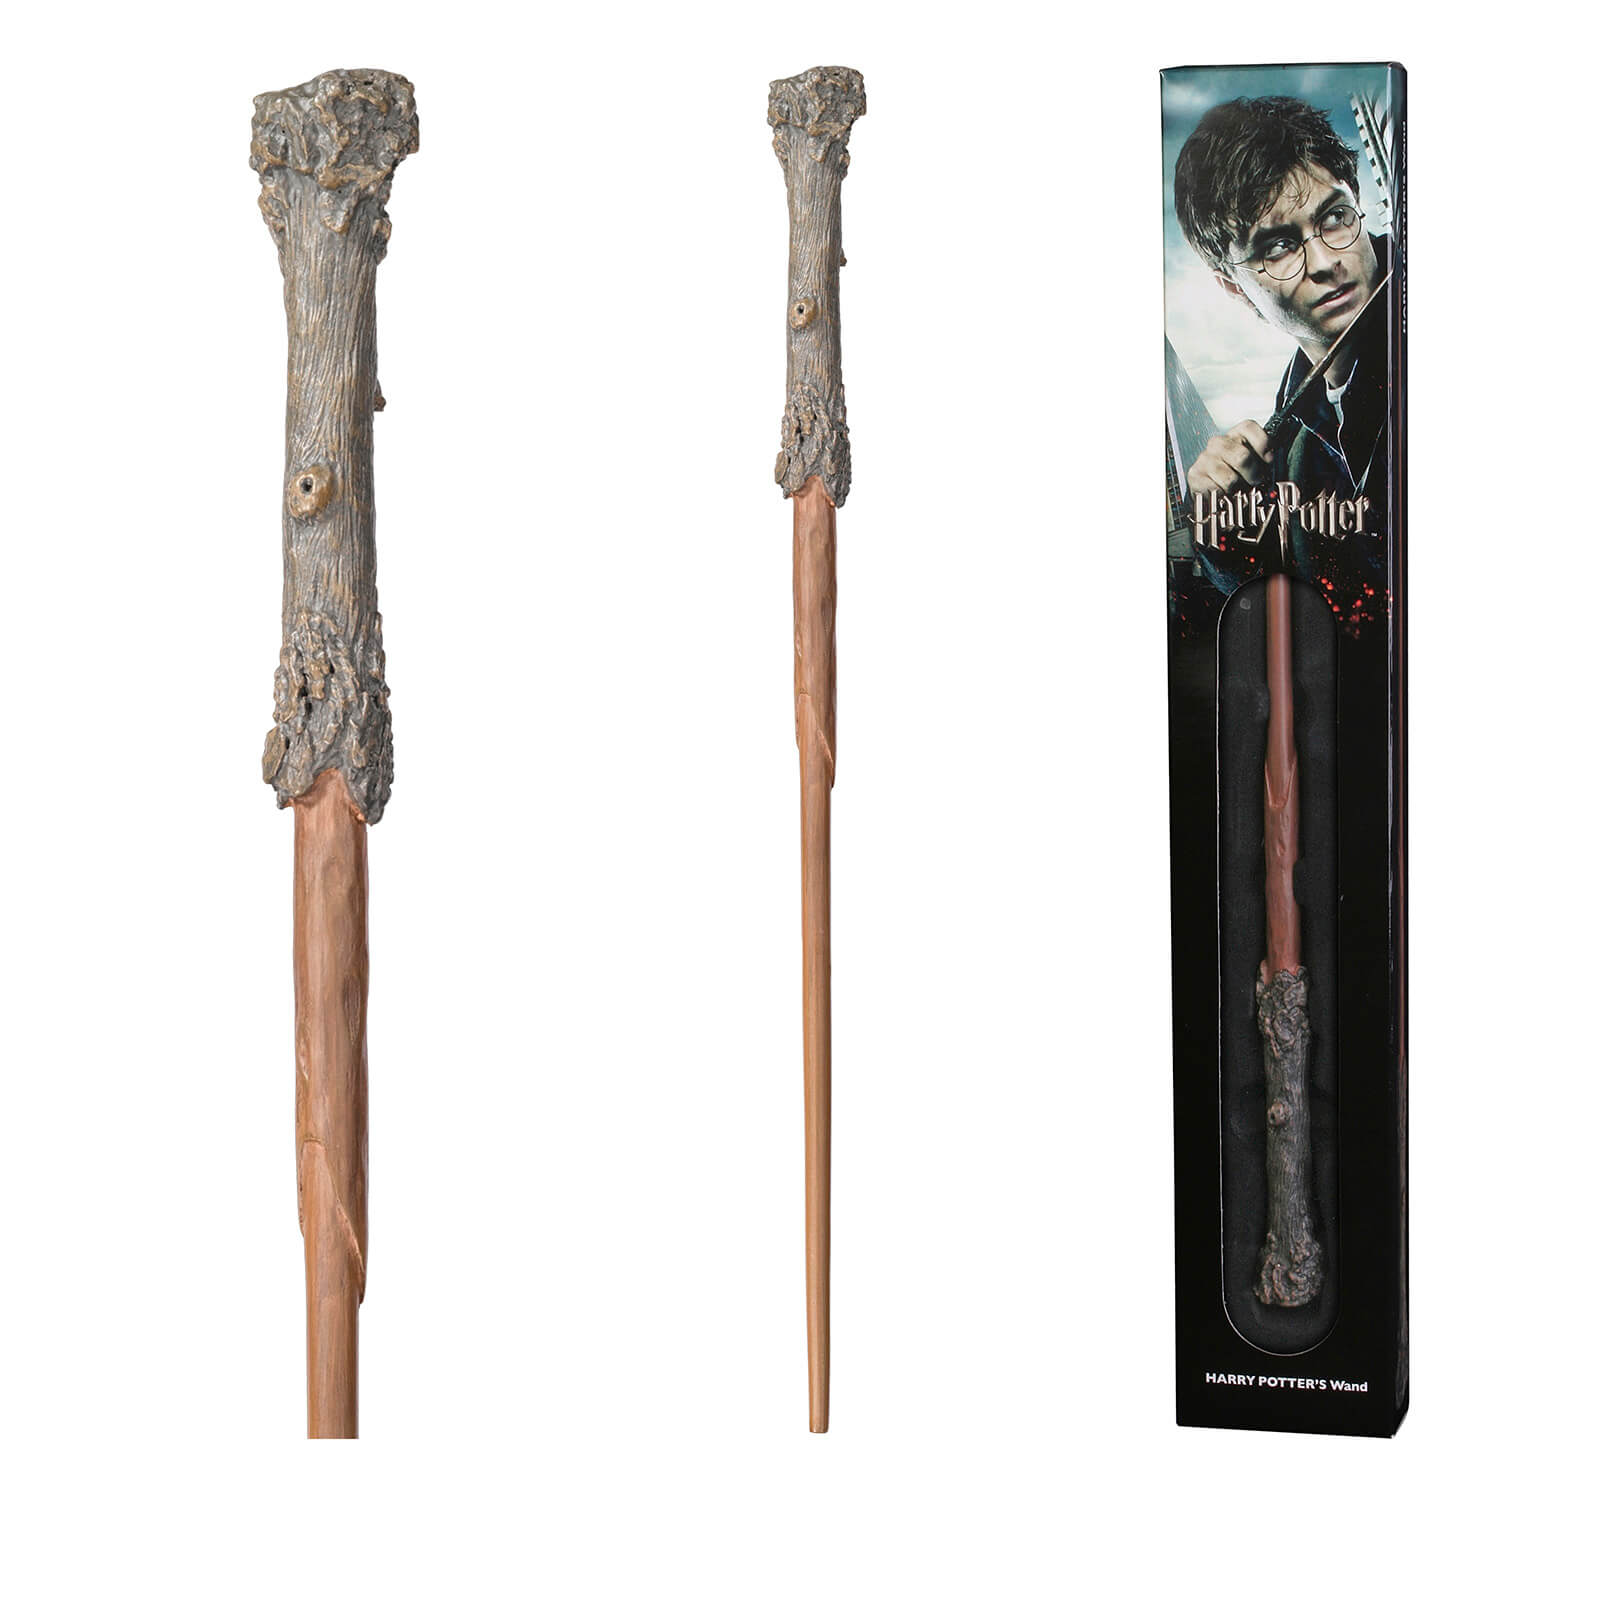 Image of Harry Potter Harry Potter's Wand with Window Box